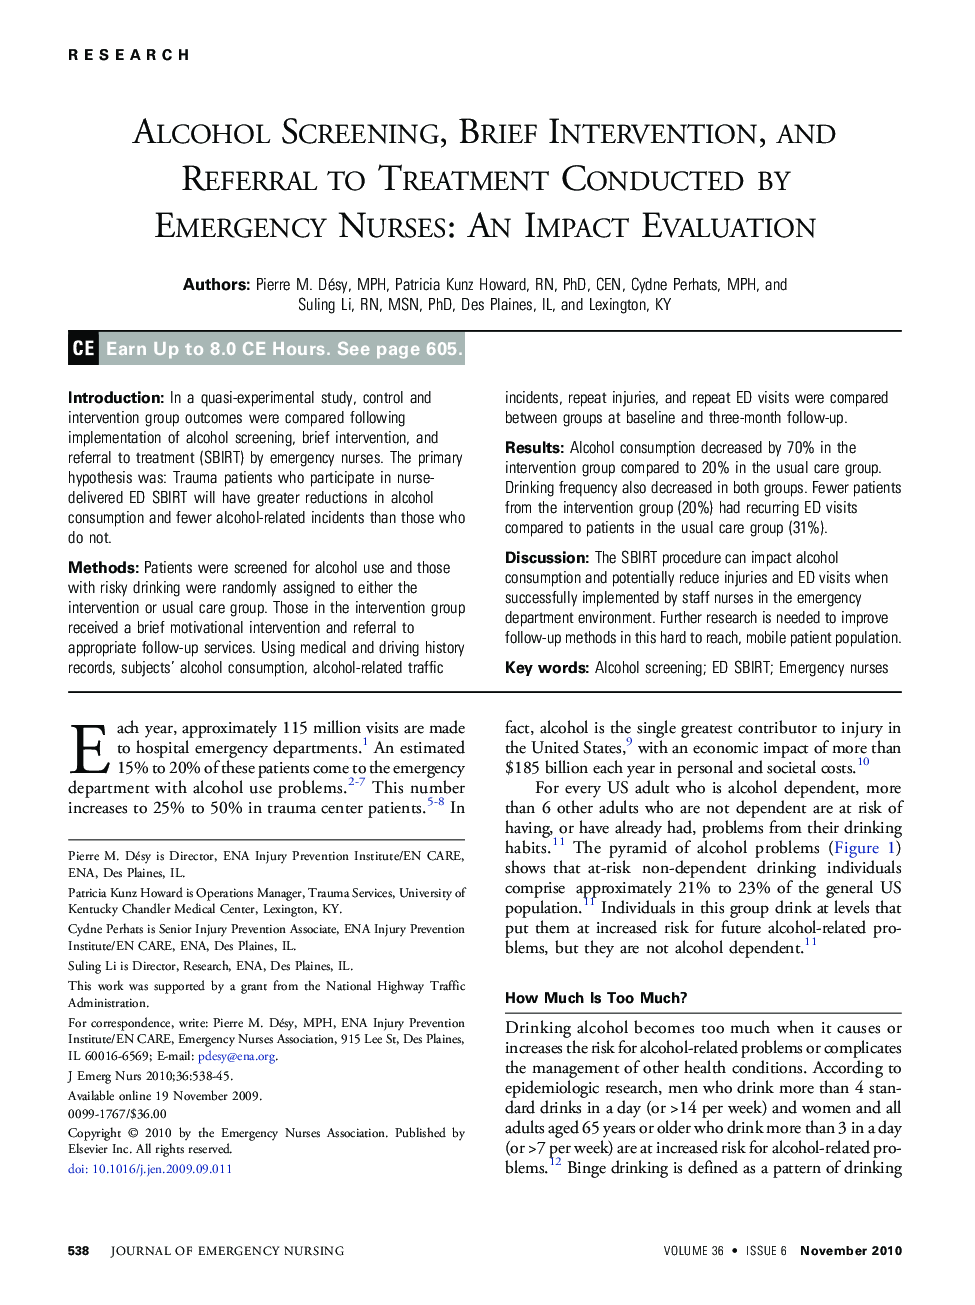 Alcohol Screening, Brief Intervention, and Referral to Treatment Conducted by Emergency Nurses: An Impact Evaluation 